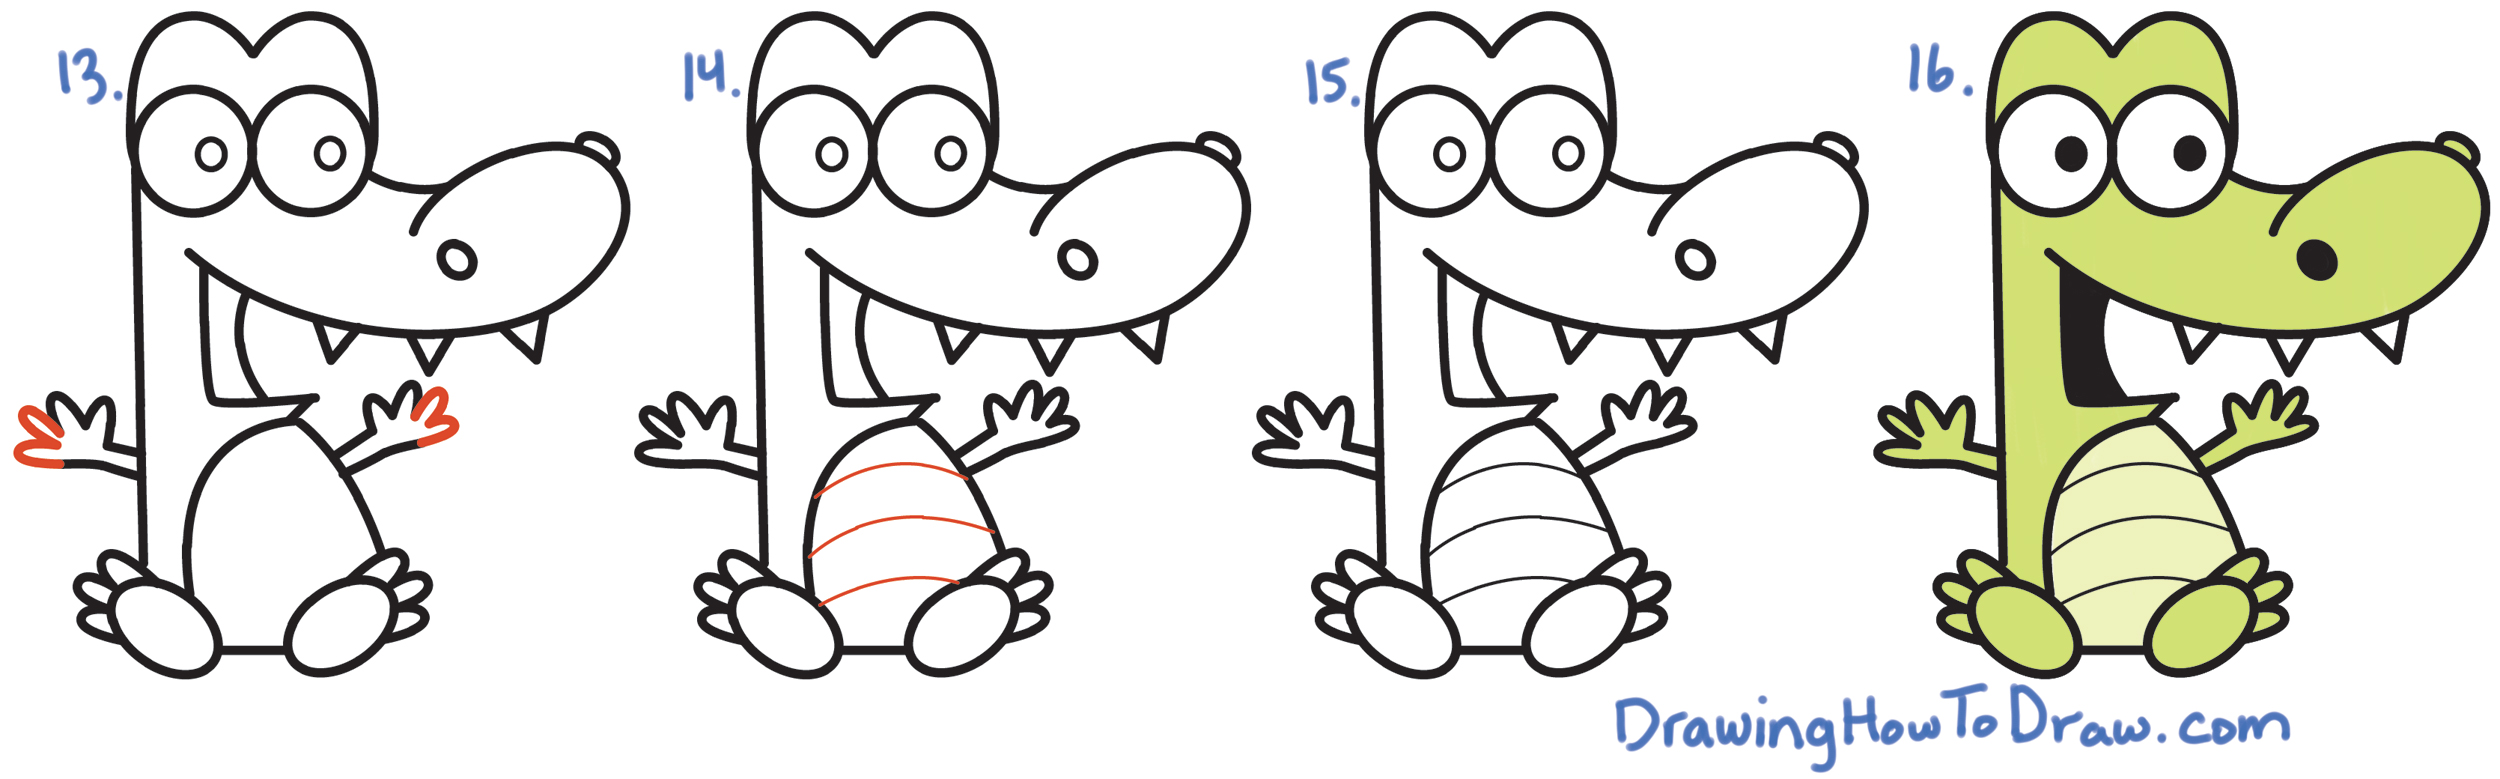 how to draw a cartoon alligator crocodile from numbers 66 easy step by step drawing tutorial for kids beginners 02